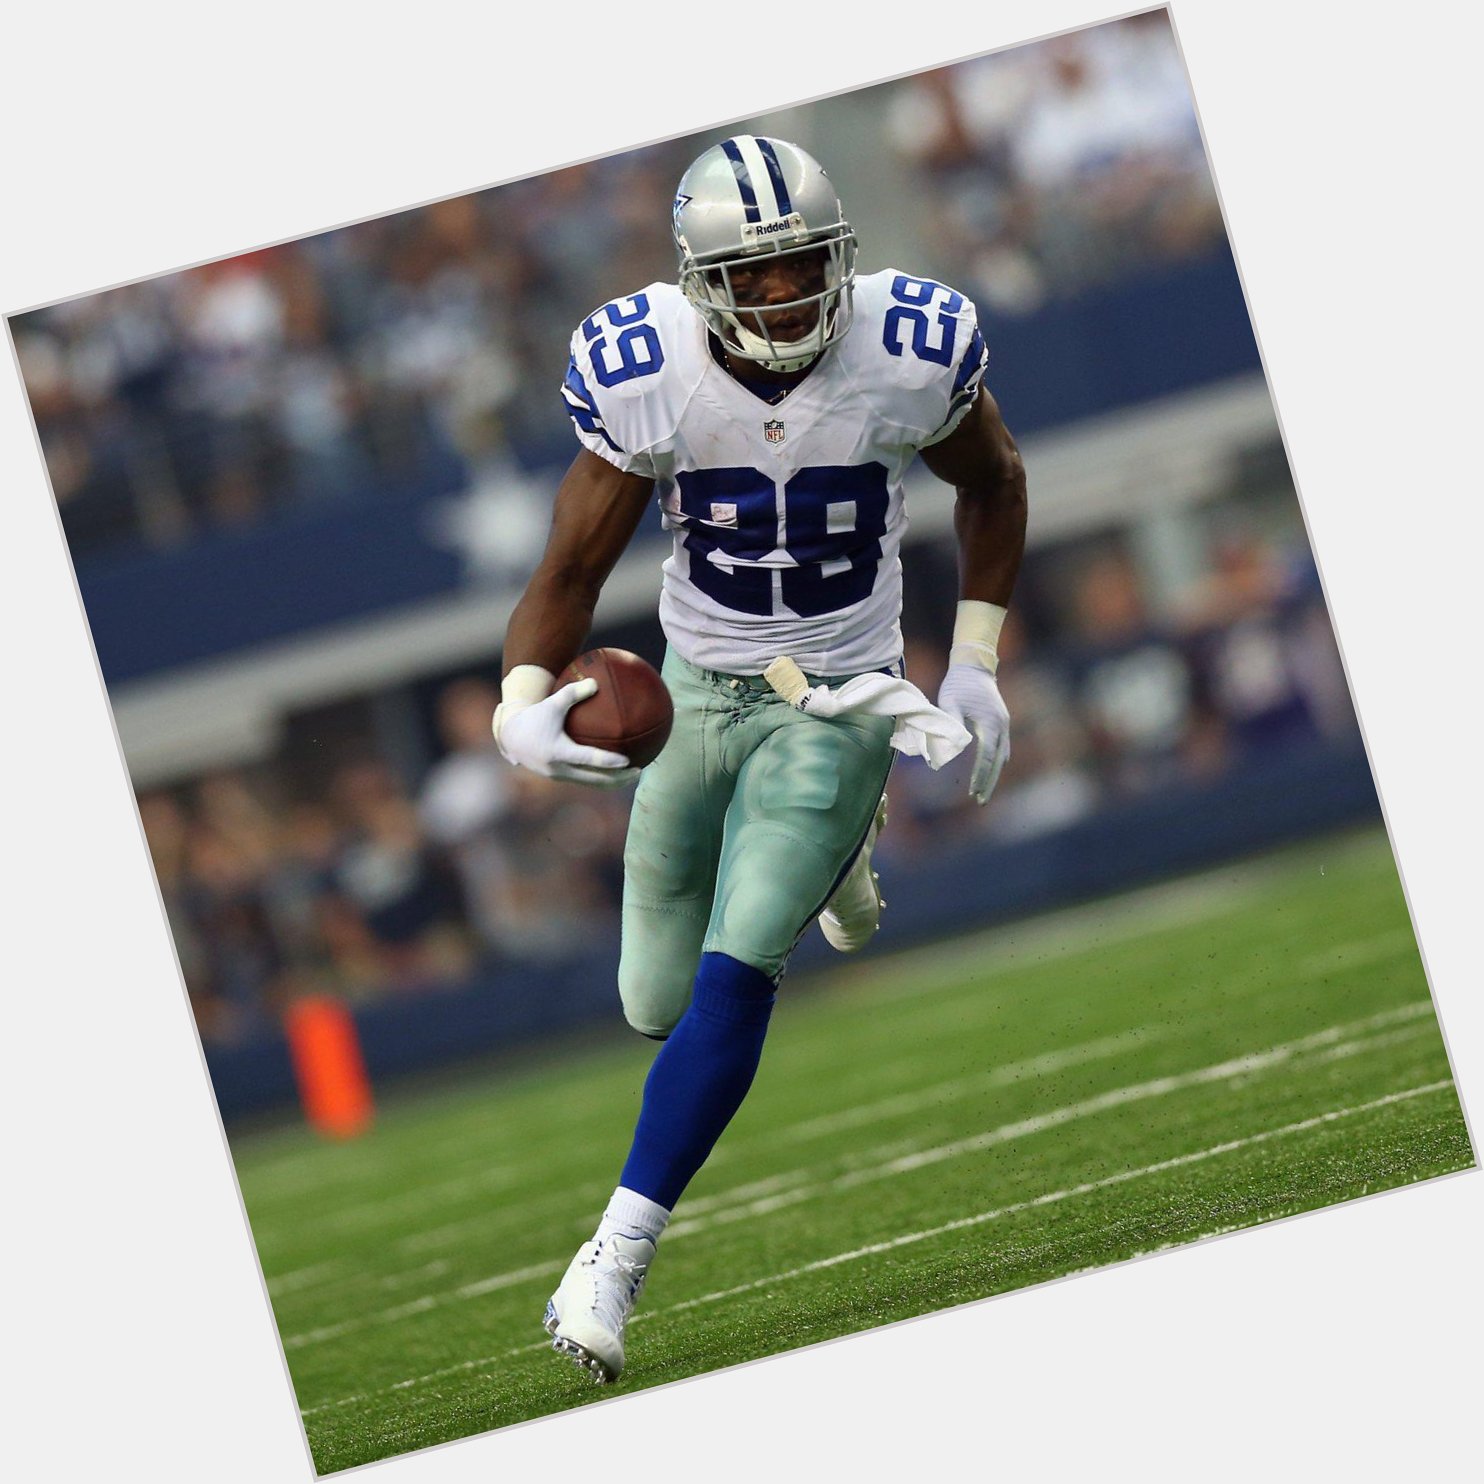 Happy Birthday to DeMarco Murray, who turns 27 today! 